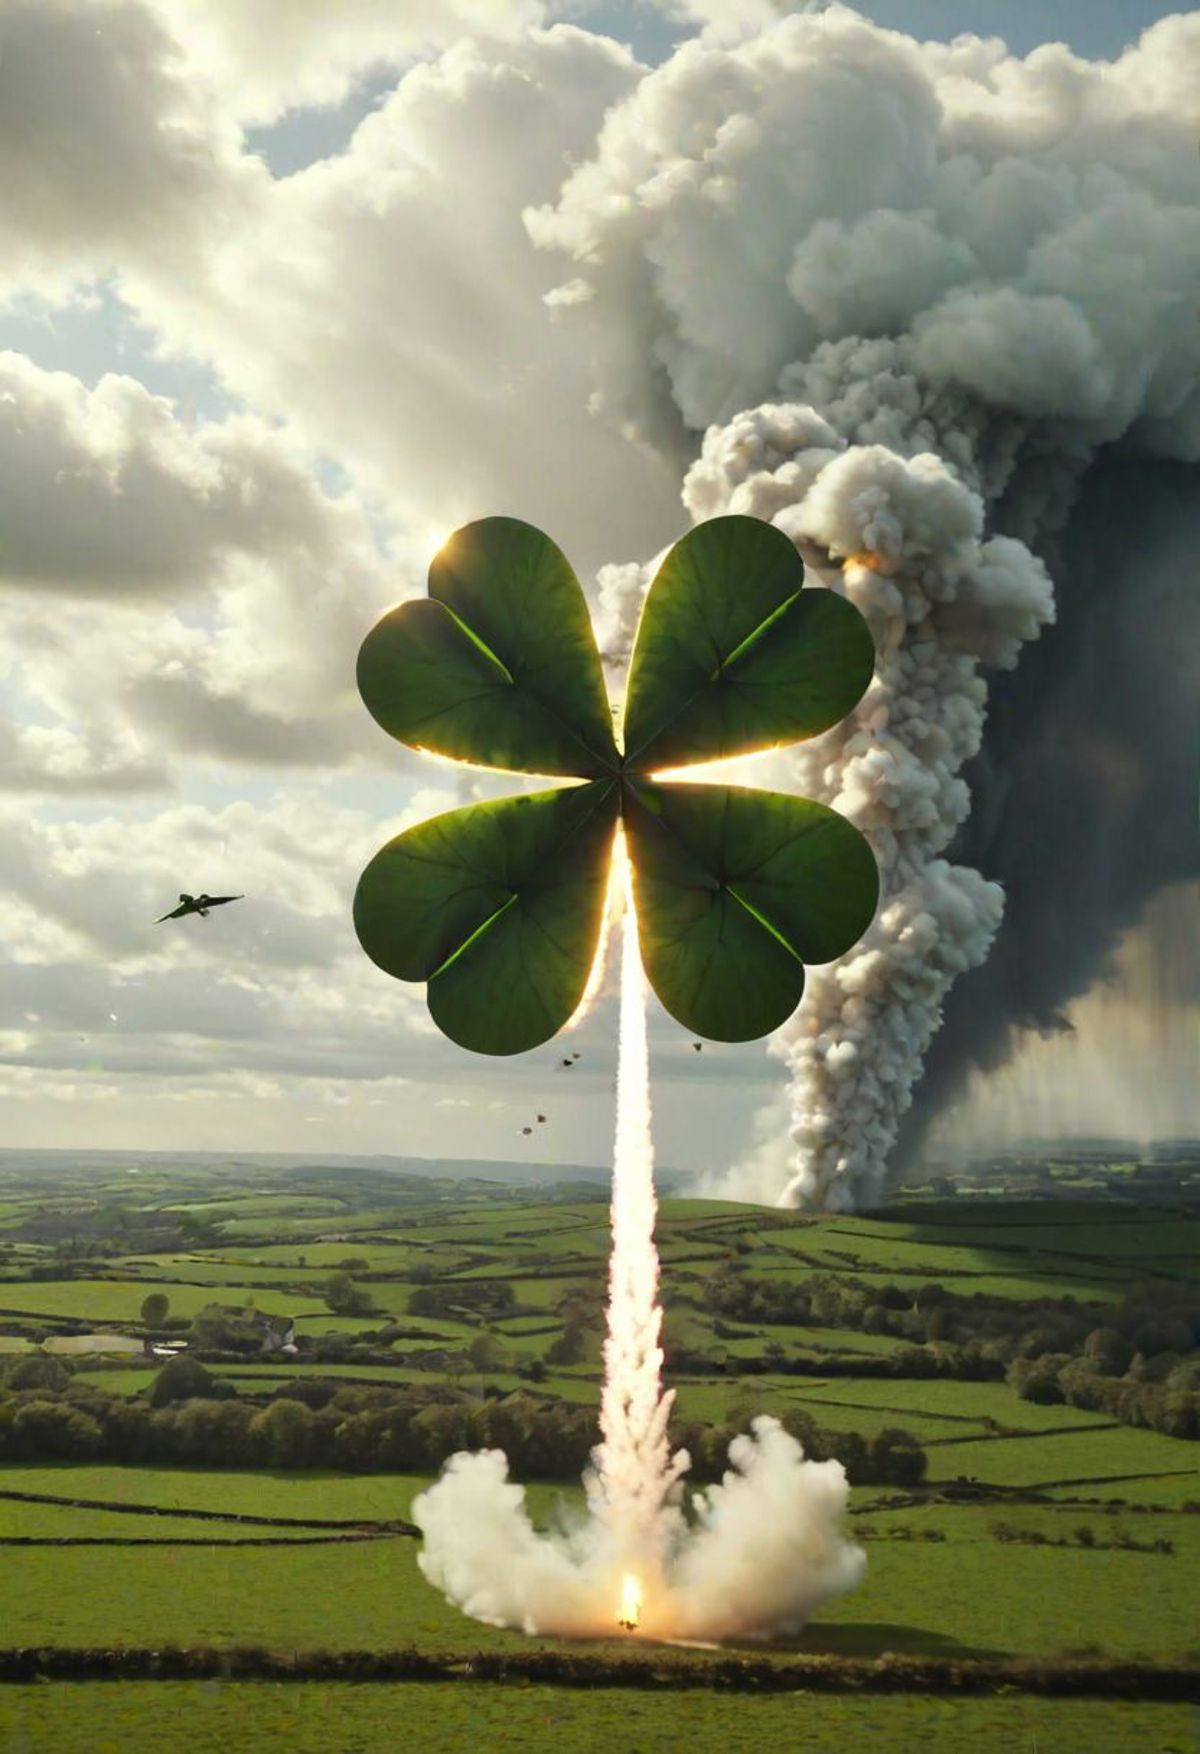 dynamic action shot, spaceship shaped like a four-leaf clover launching skyward, trails of smoke and fire, lush Irish coun...